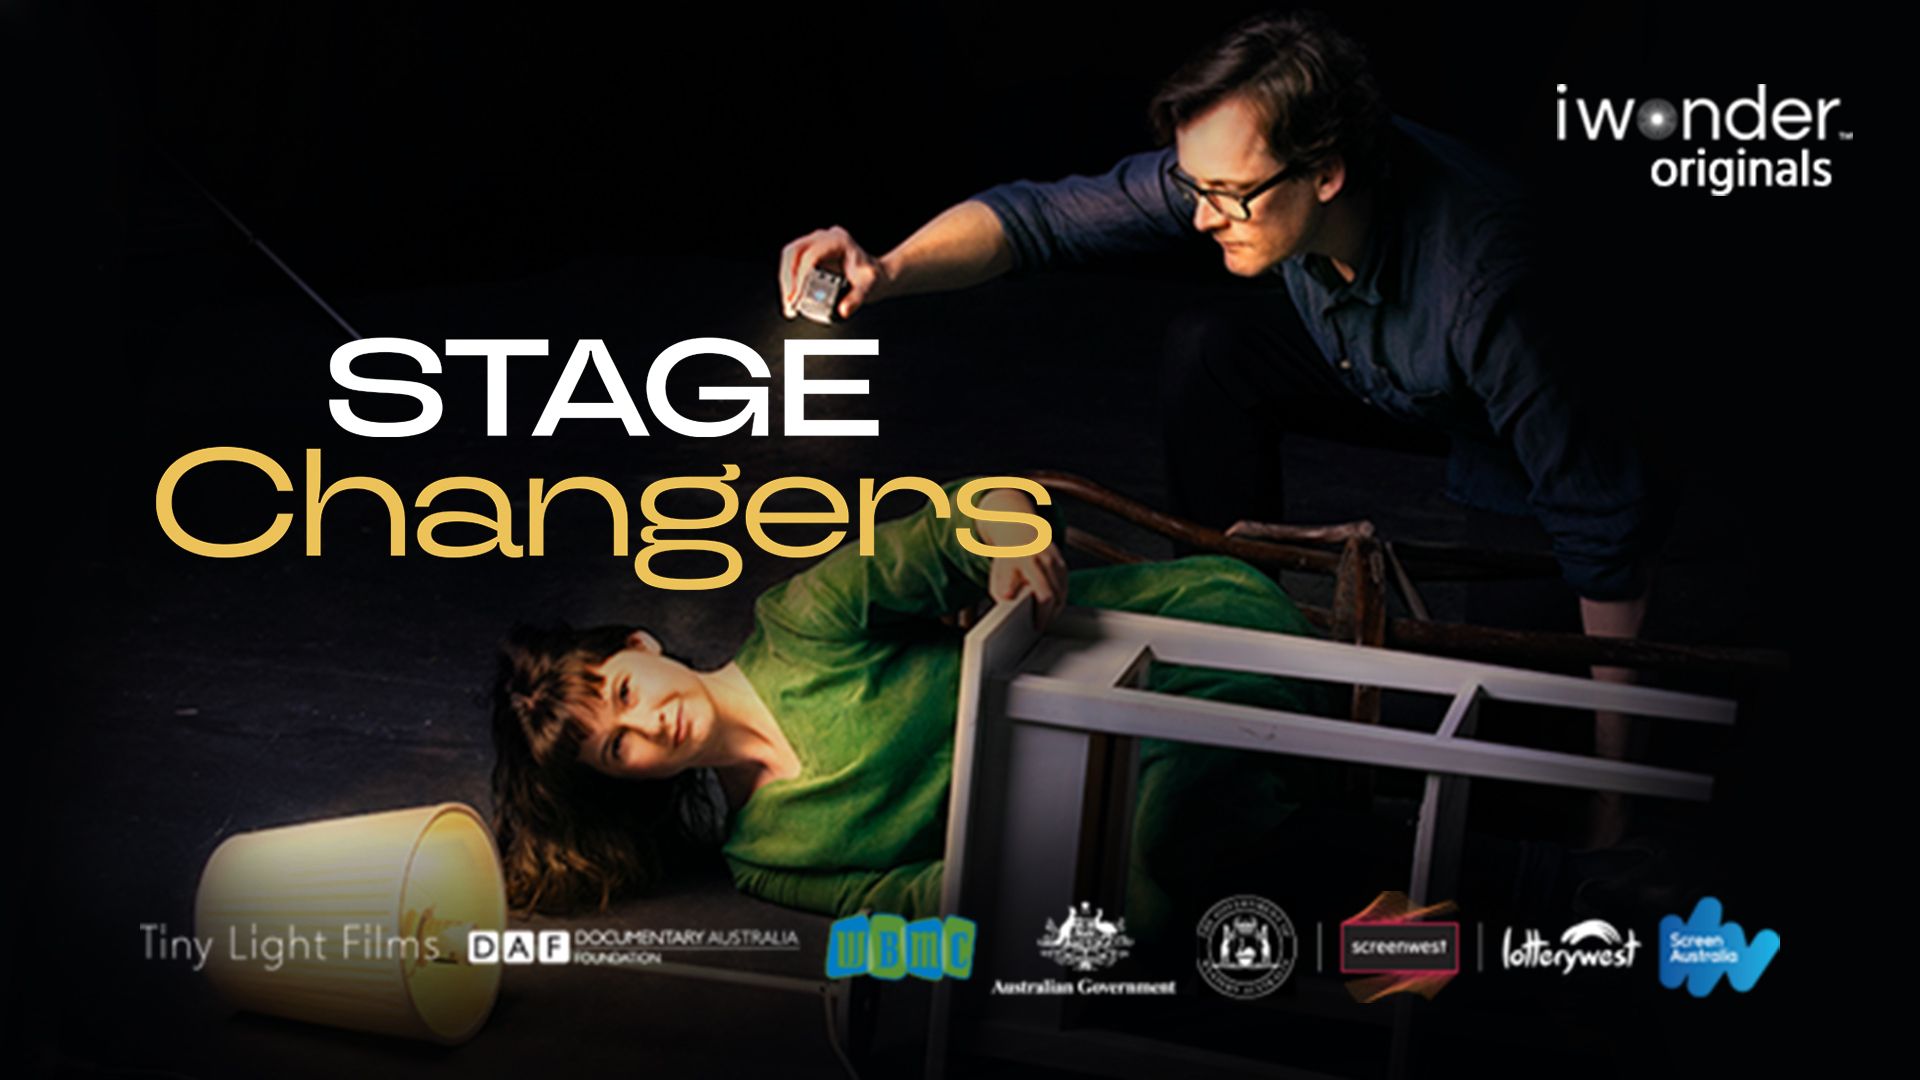 iwonder original Stage Changers: The story of a truly unique theatre company